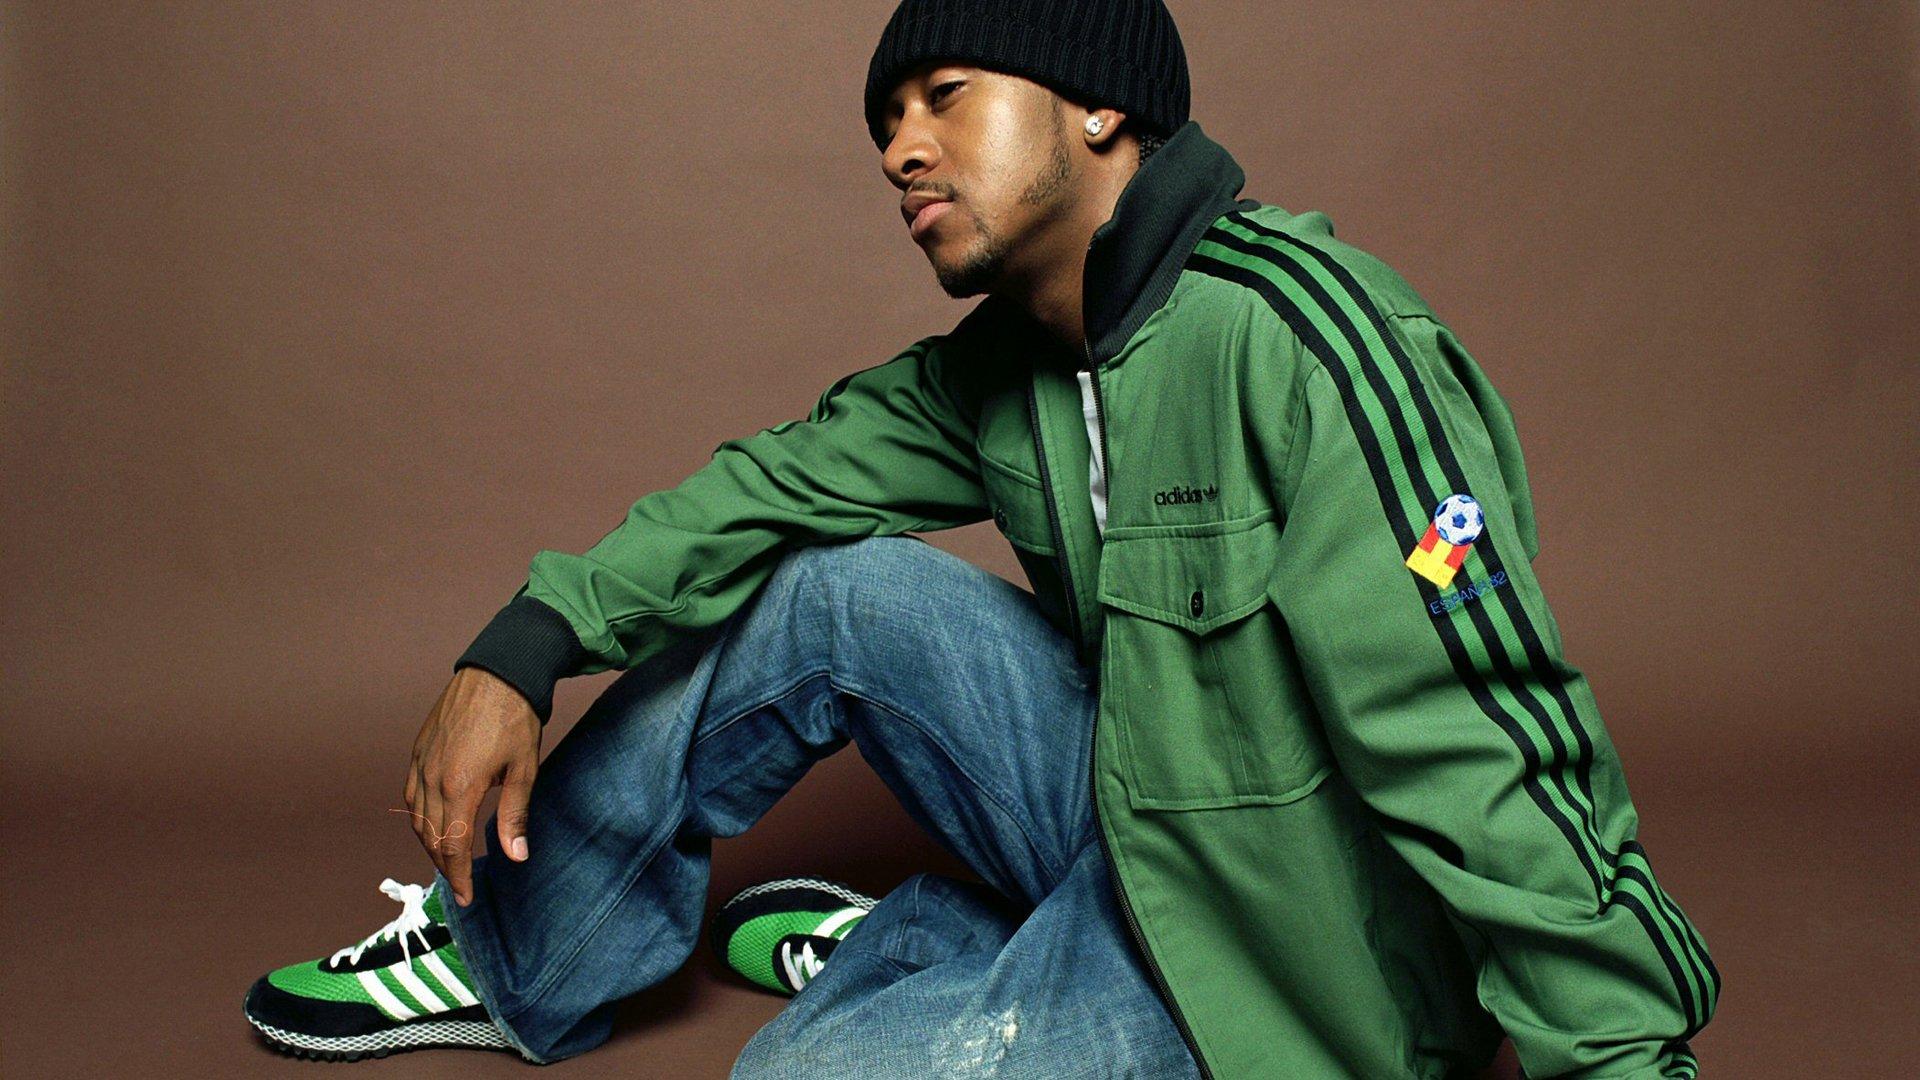 Omarion HD Wallpaper and Background Image